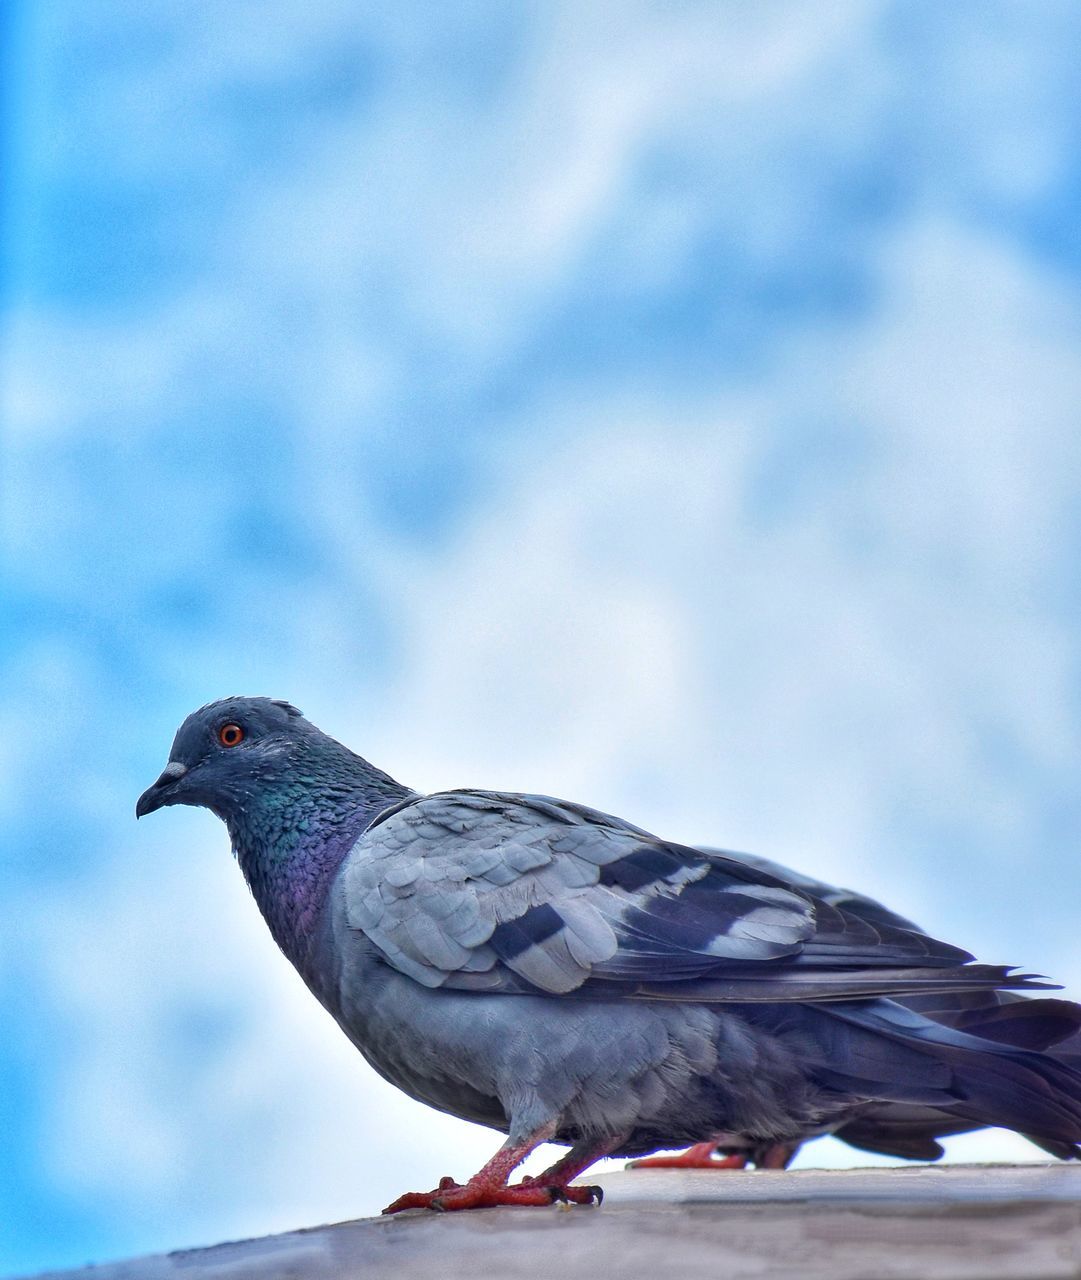 CLOSE-UP OF PIGEON PERCHING